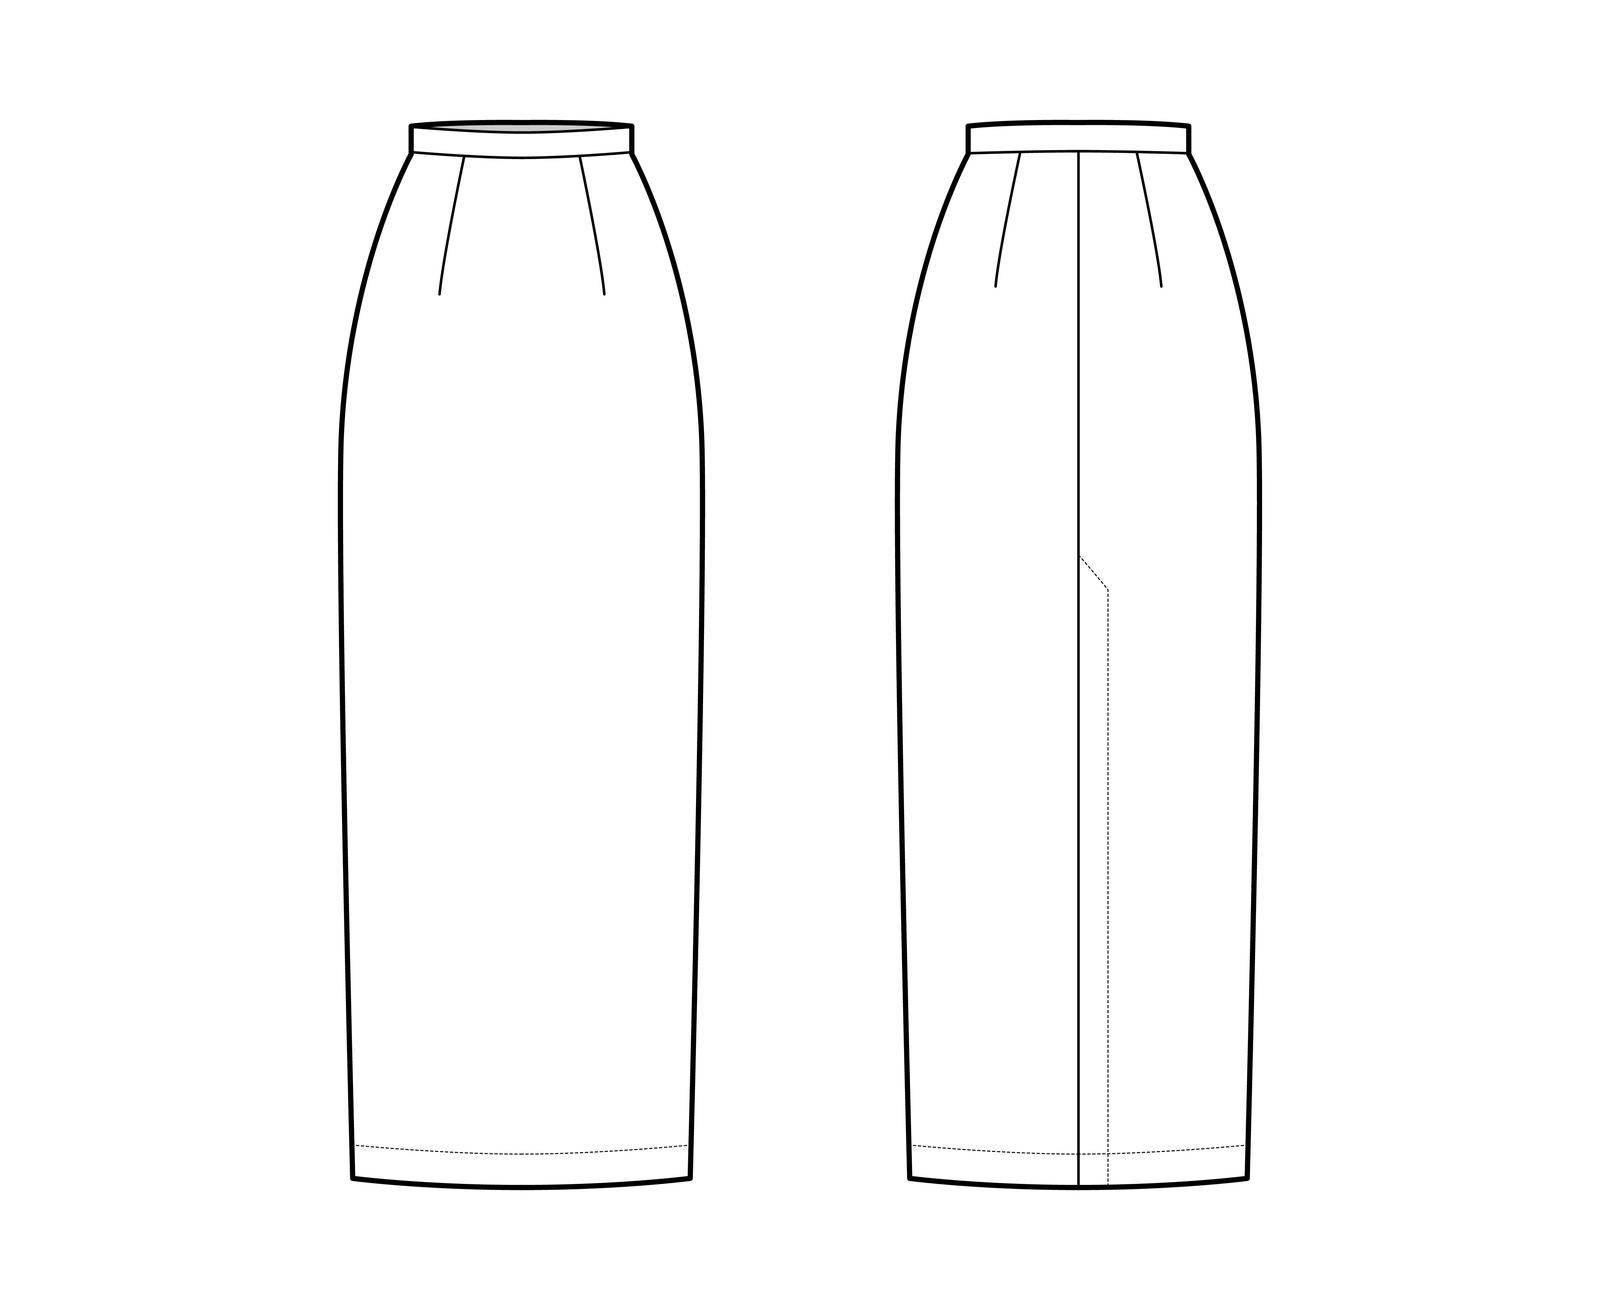 Skirt maxi pencil fullness silhouette technical fashion illustration with back slit, floor ankle lengths. Flat bottom template front, white color style. Women men unisex CAD mockup